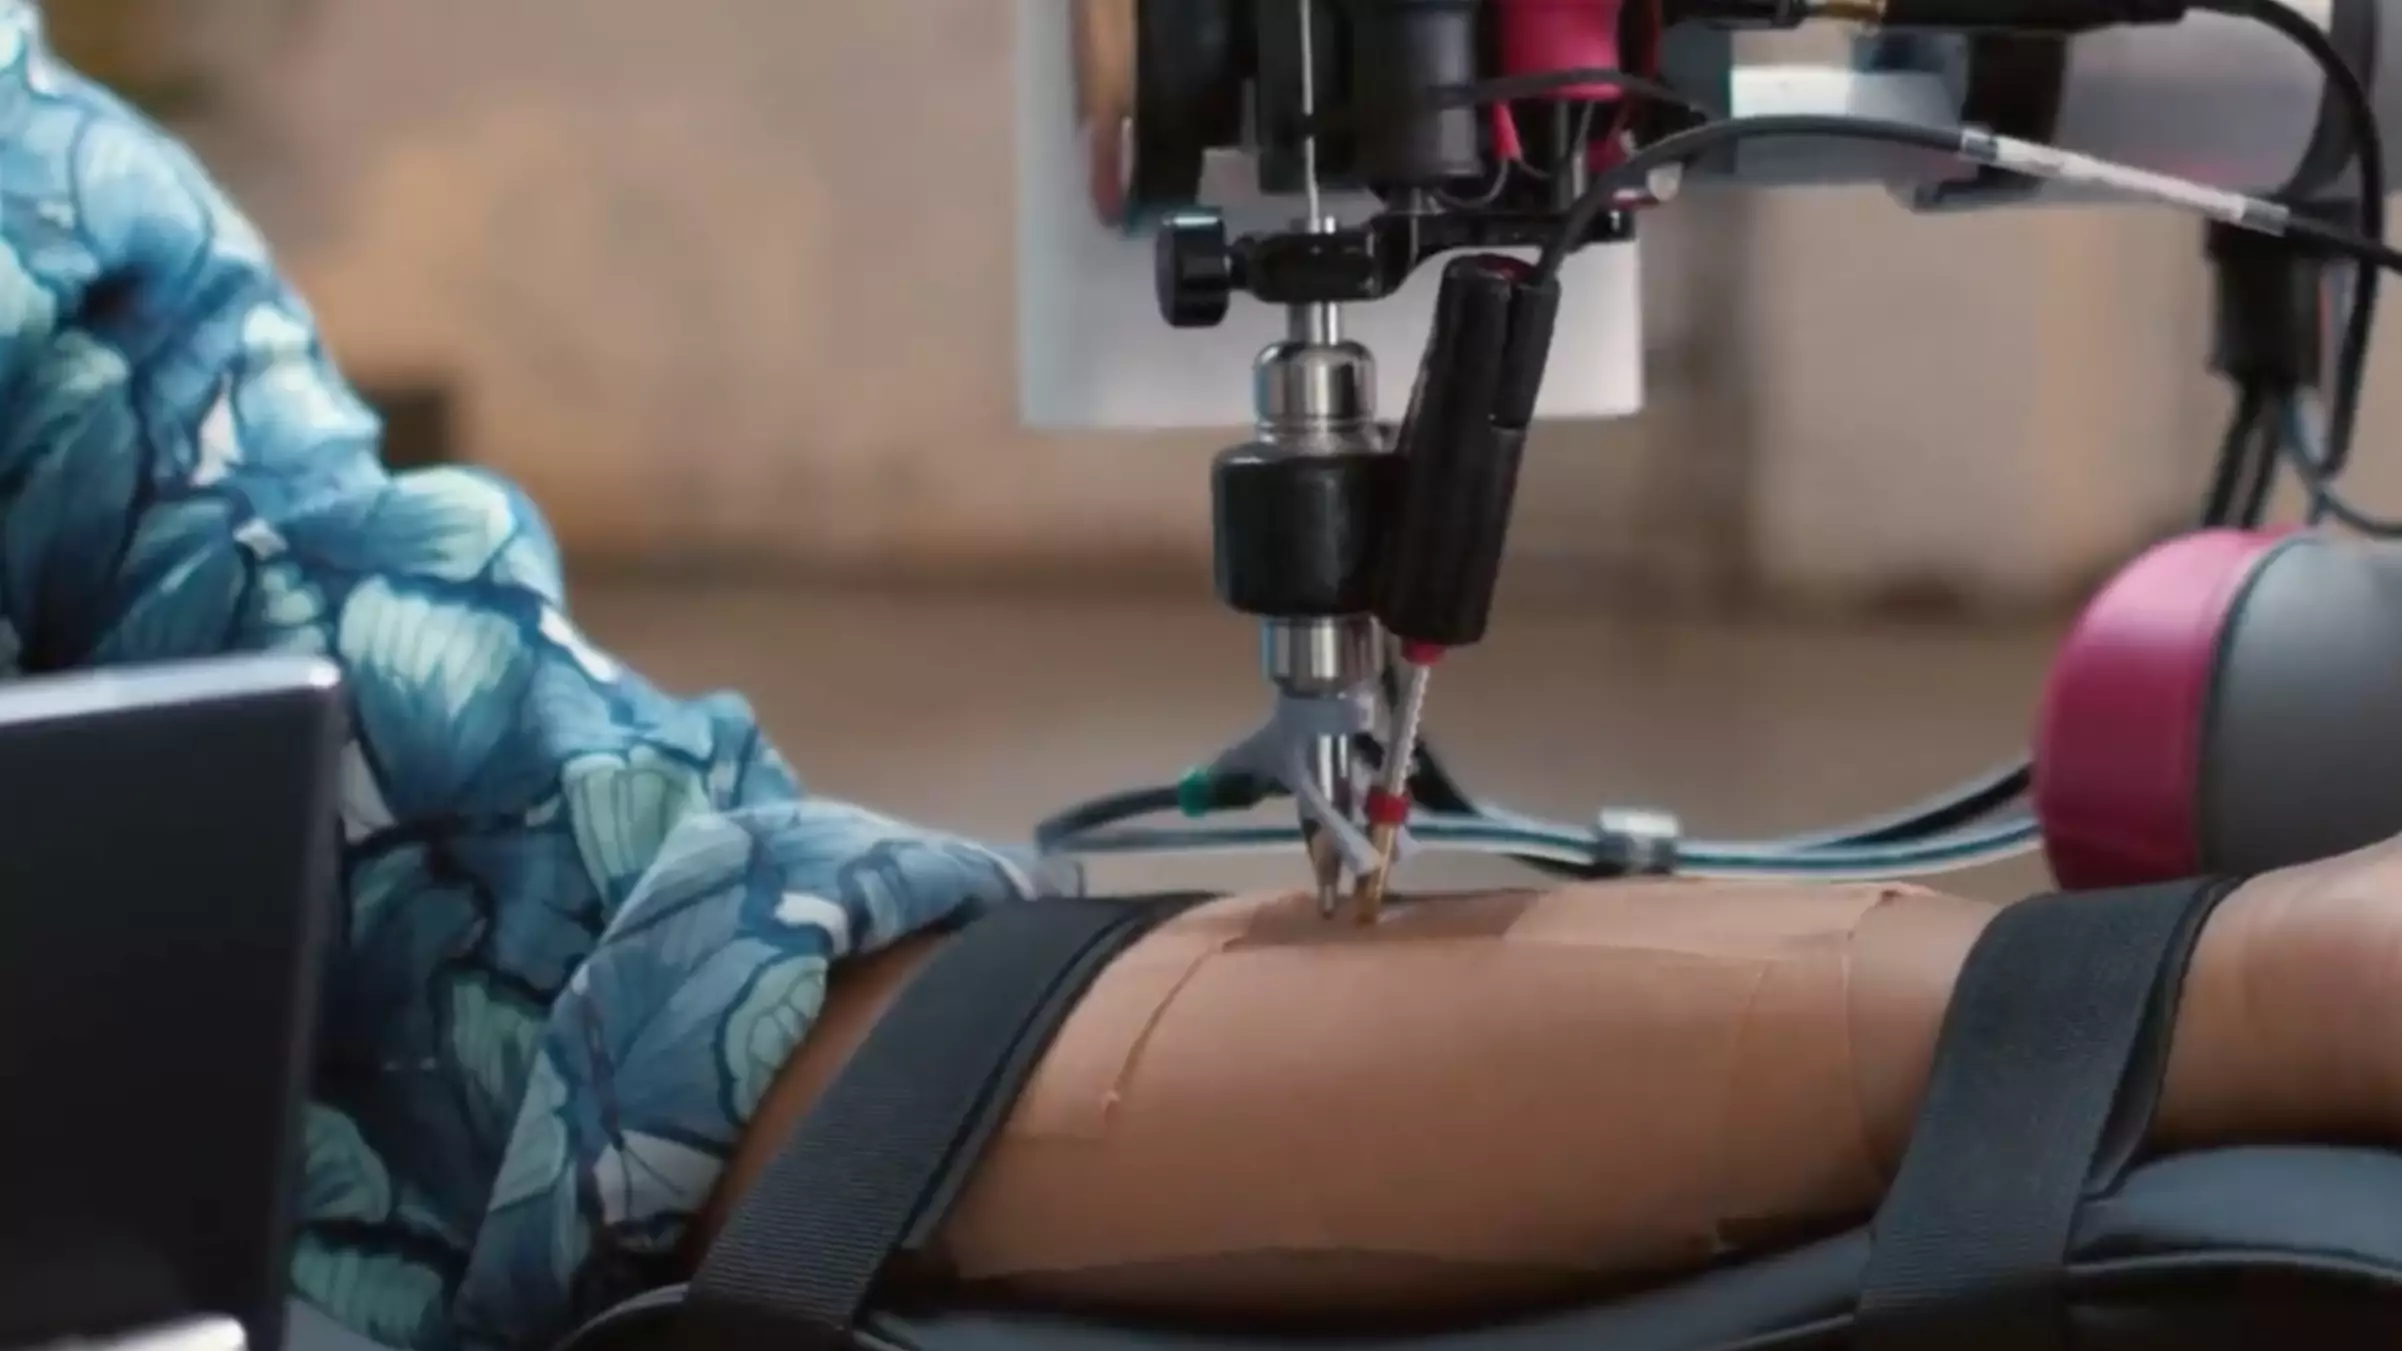 World's First 5G-Powered Remote Tattoo Completed By Robotic Arm